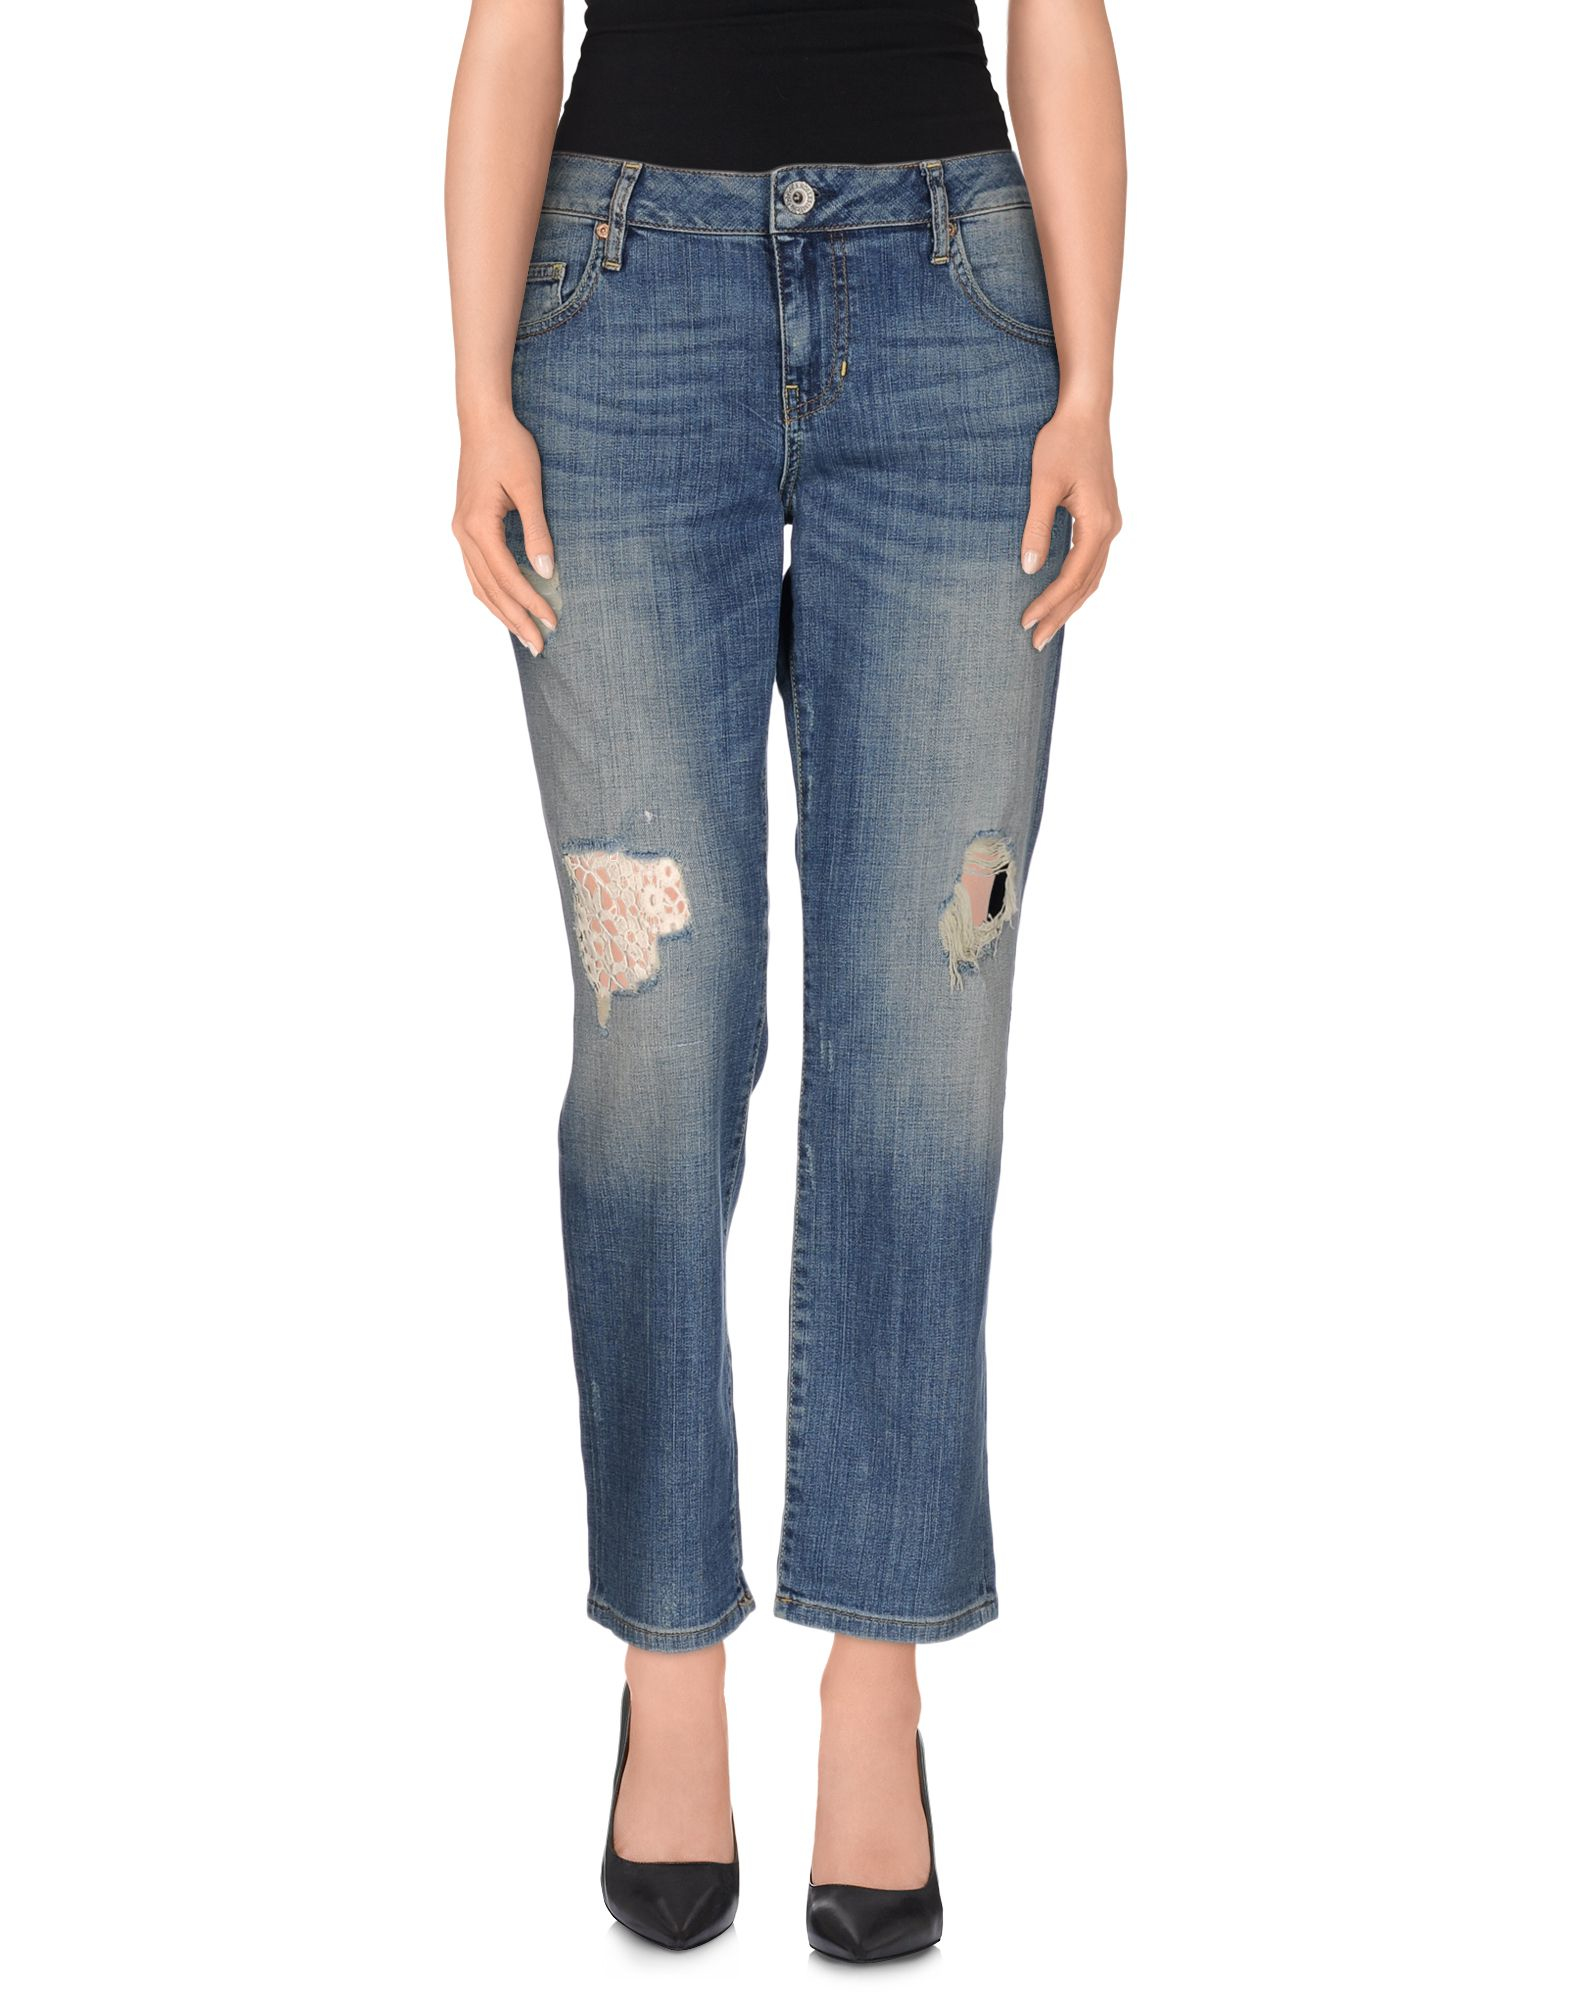 guess denim outfits - AOL Image Search Results